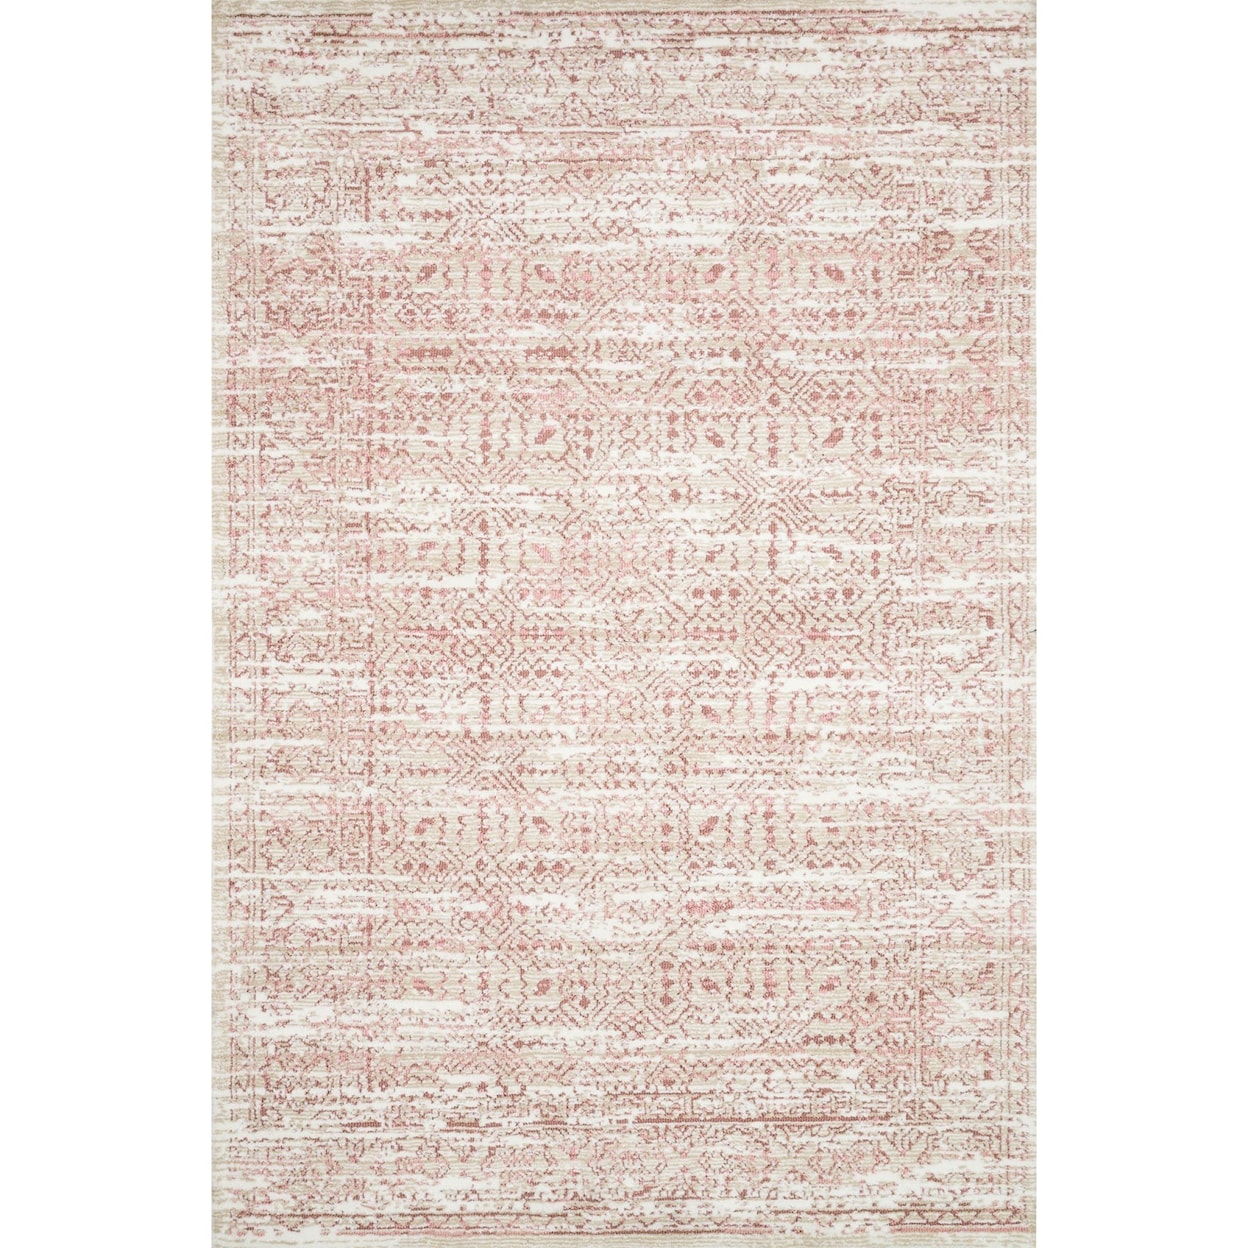 Magnolia Home by Joanna Gaines for Loloi Lotus 7'-9" x 9'-9" Rug